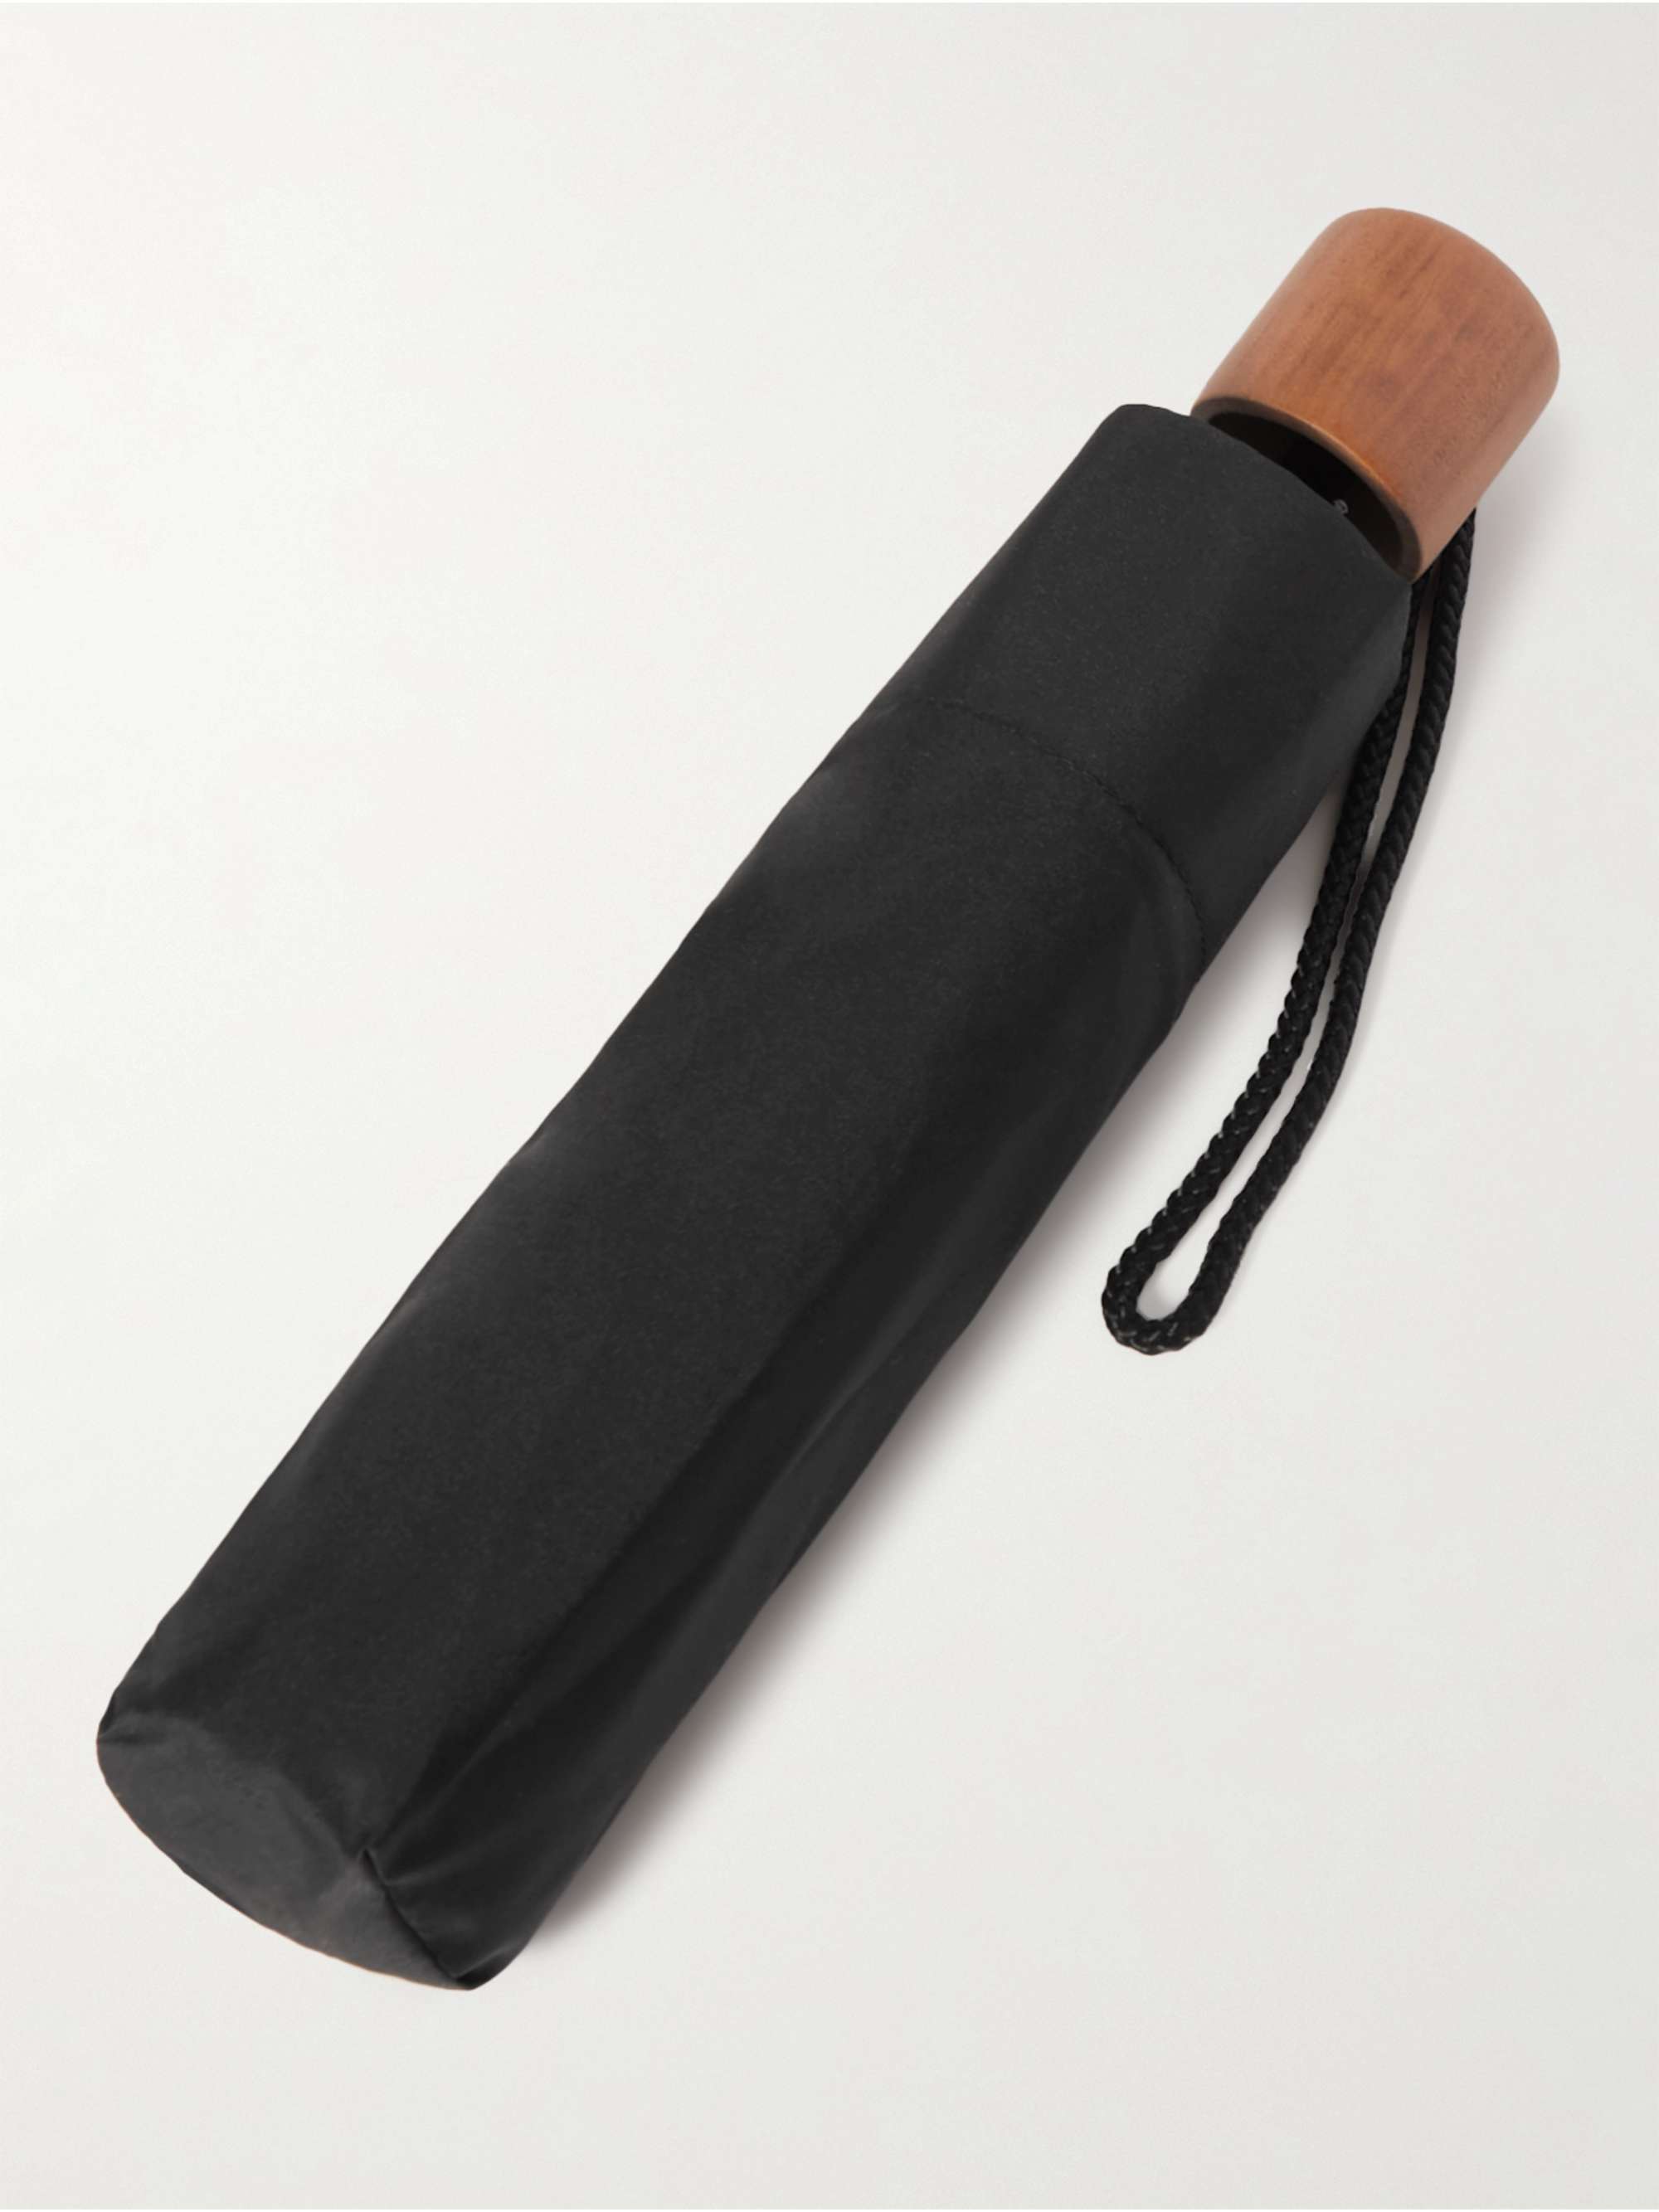 PAUL SMITH Contrast-Tipped Wood-Handle Fold-Up Umbrella